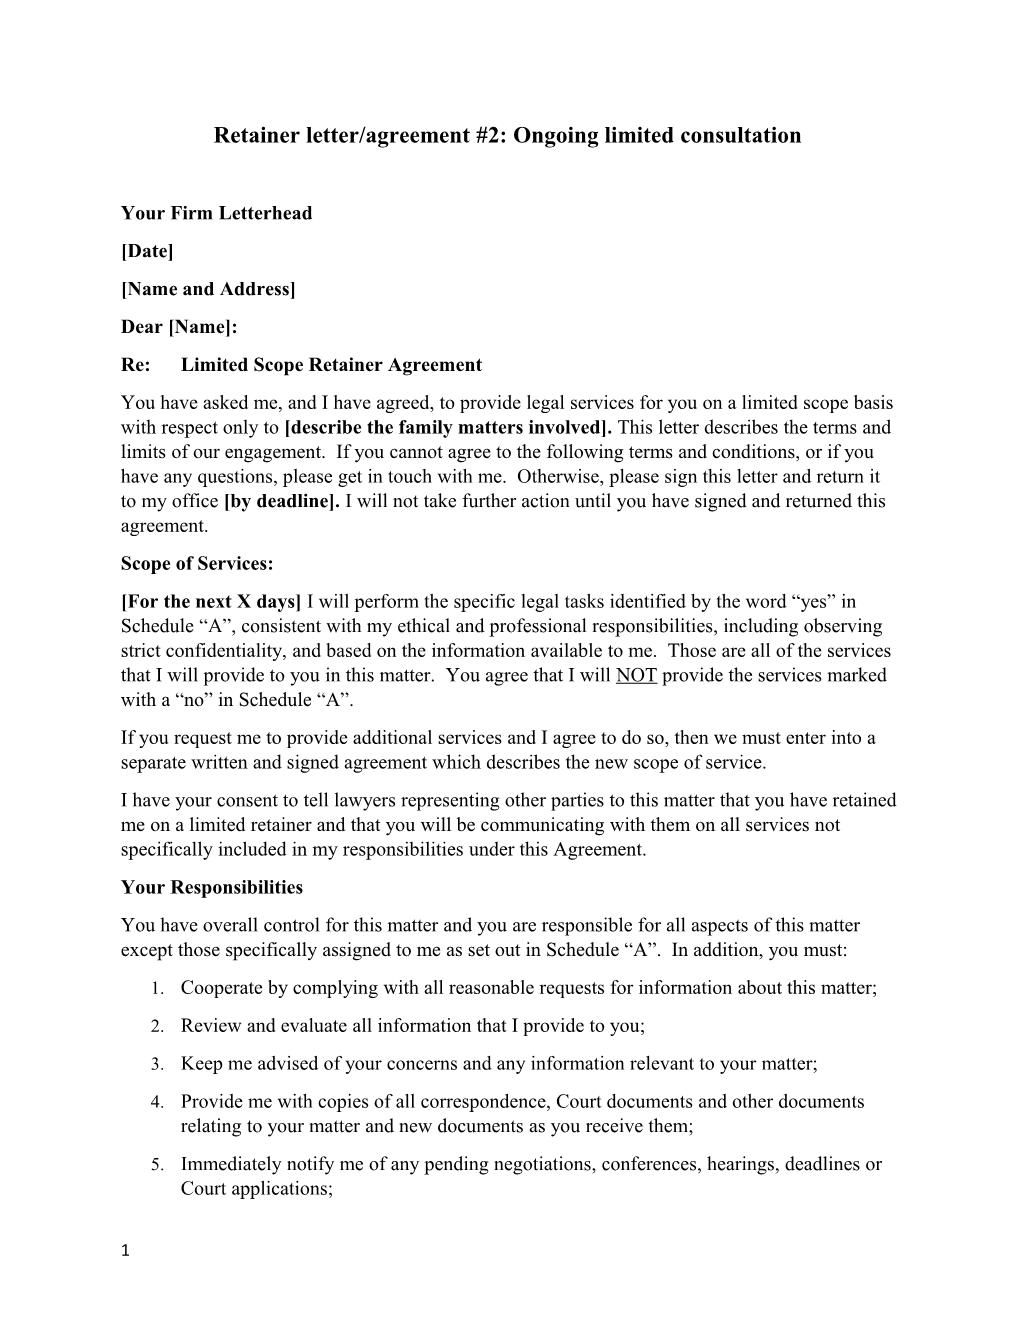 Retainer Letter/Agreement #2: Ongoing Limited Consultation